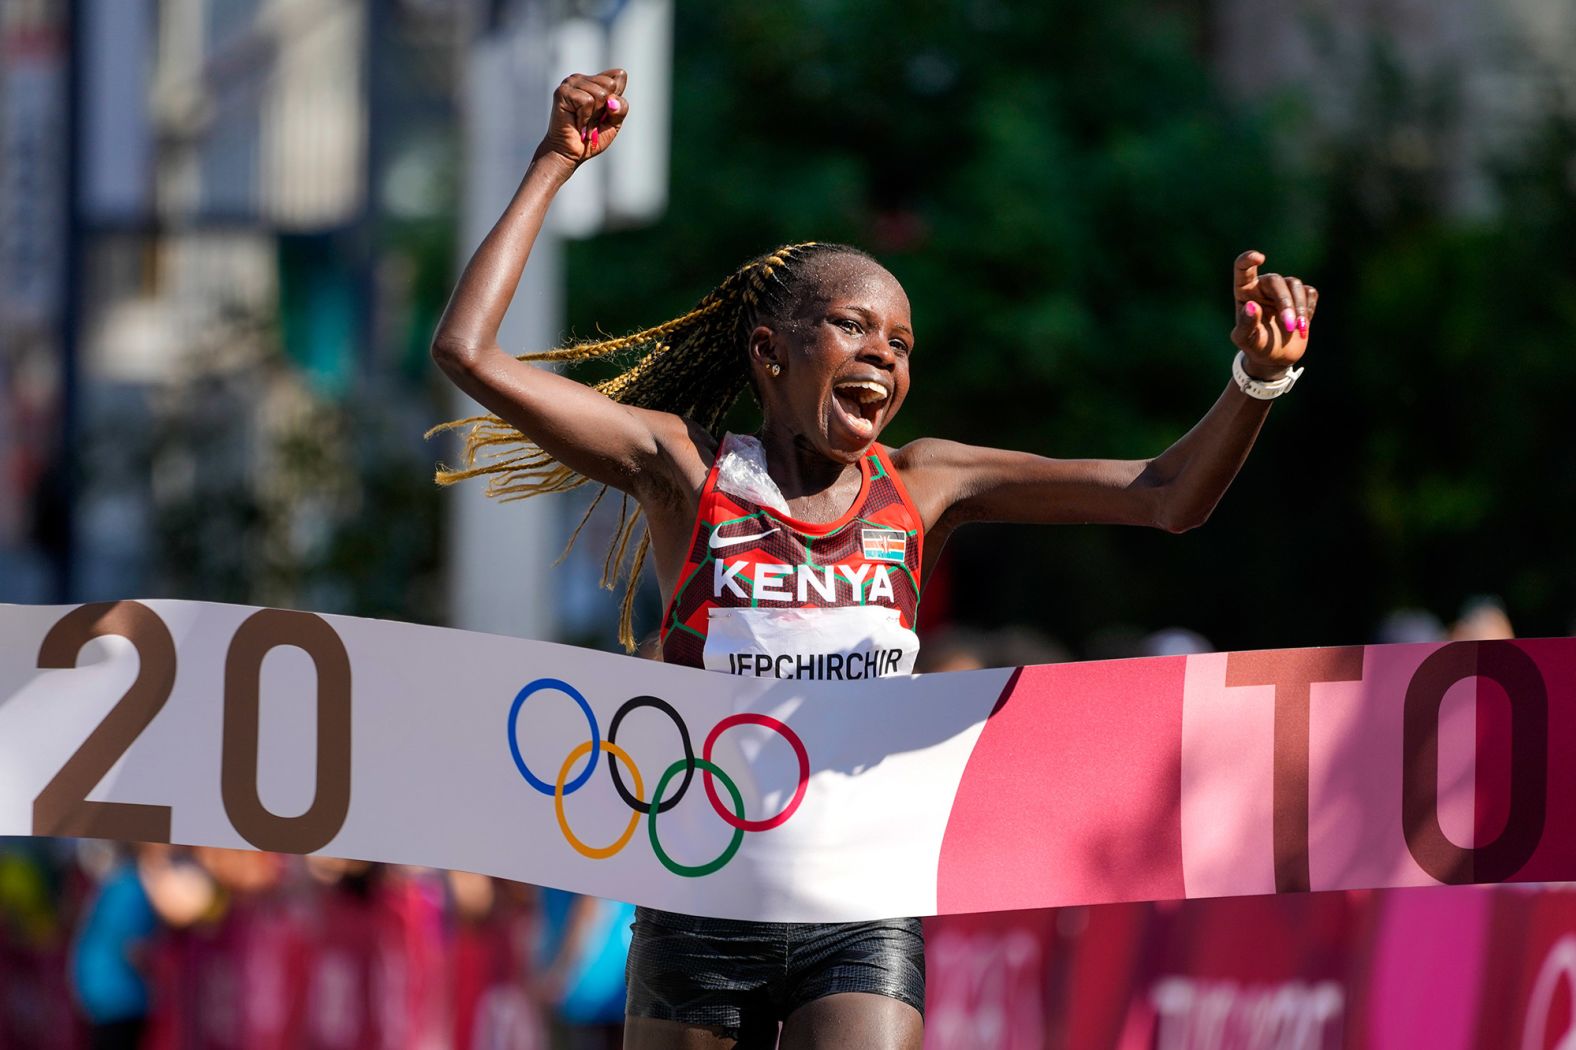 Kenya's Peres Jepchirchir crosses the finish line to <a href="index.php?page=&url=https%3A%2F%2Fwww.cnn.com%2Fworld%2Flive-news%2Ftokyo-2020-olympics-08-06-21-spt%2Fh_858792735c3c8bfeccdc9dbf238e95bc" target="_blank">win the marathon</a> on August 7. Her countrywoman Brigid Kosgei earned the silver medal.